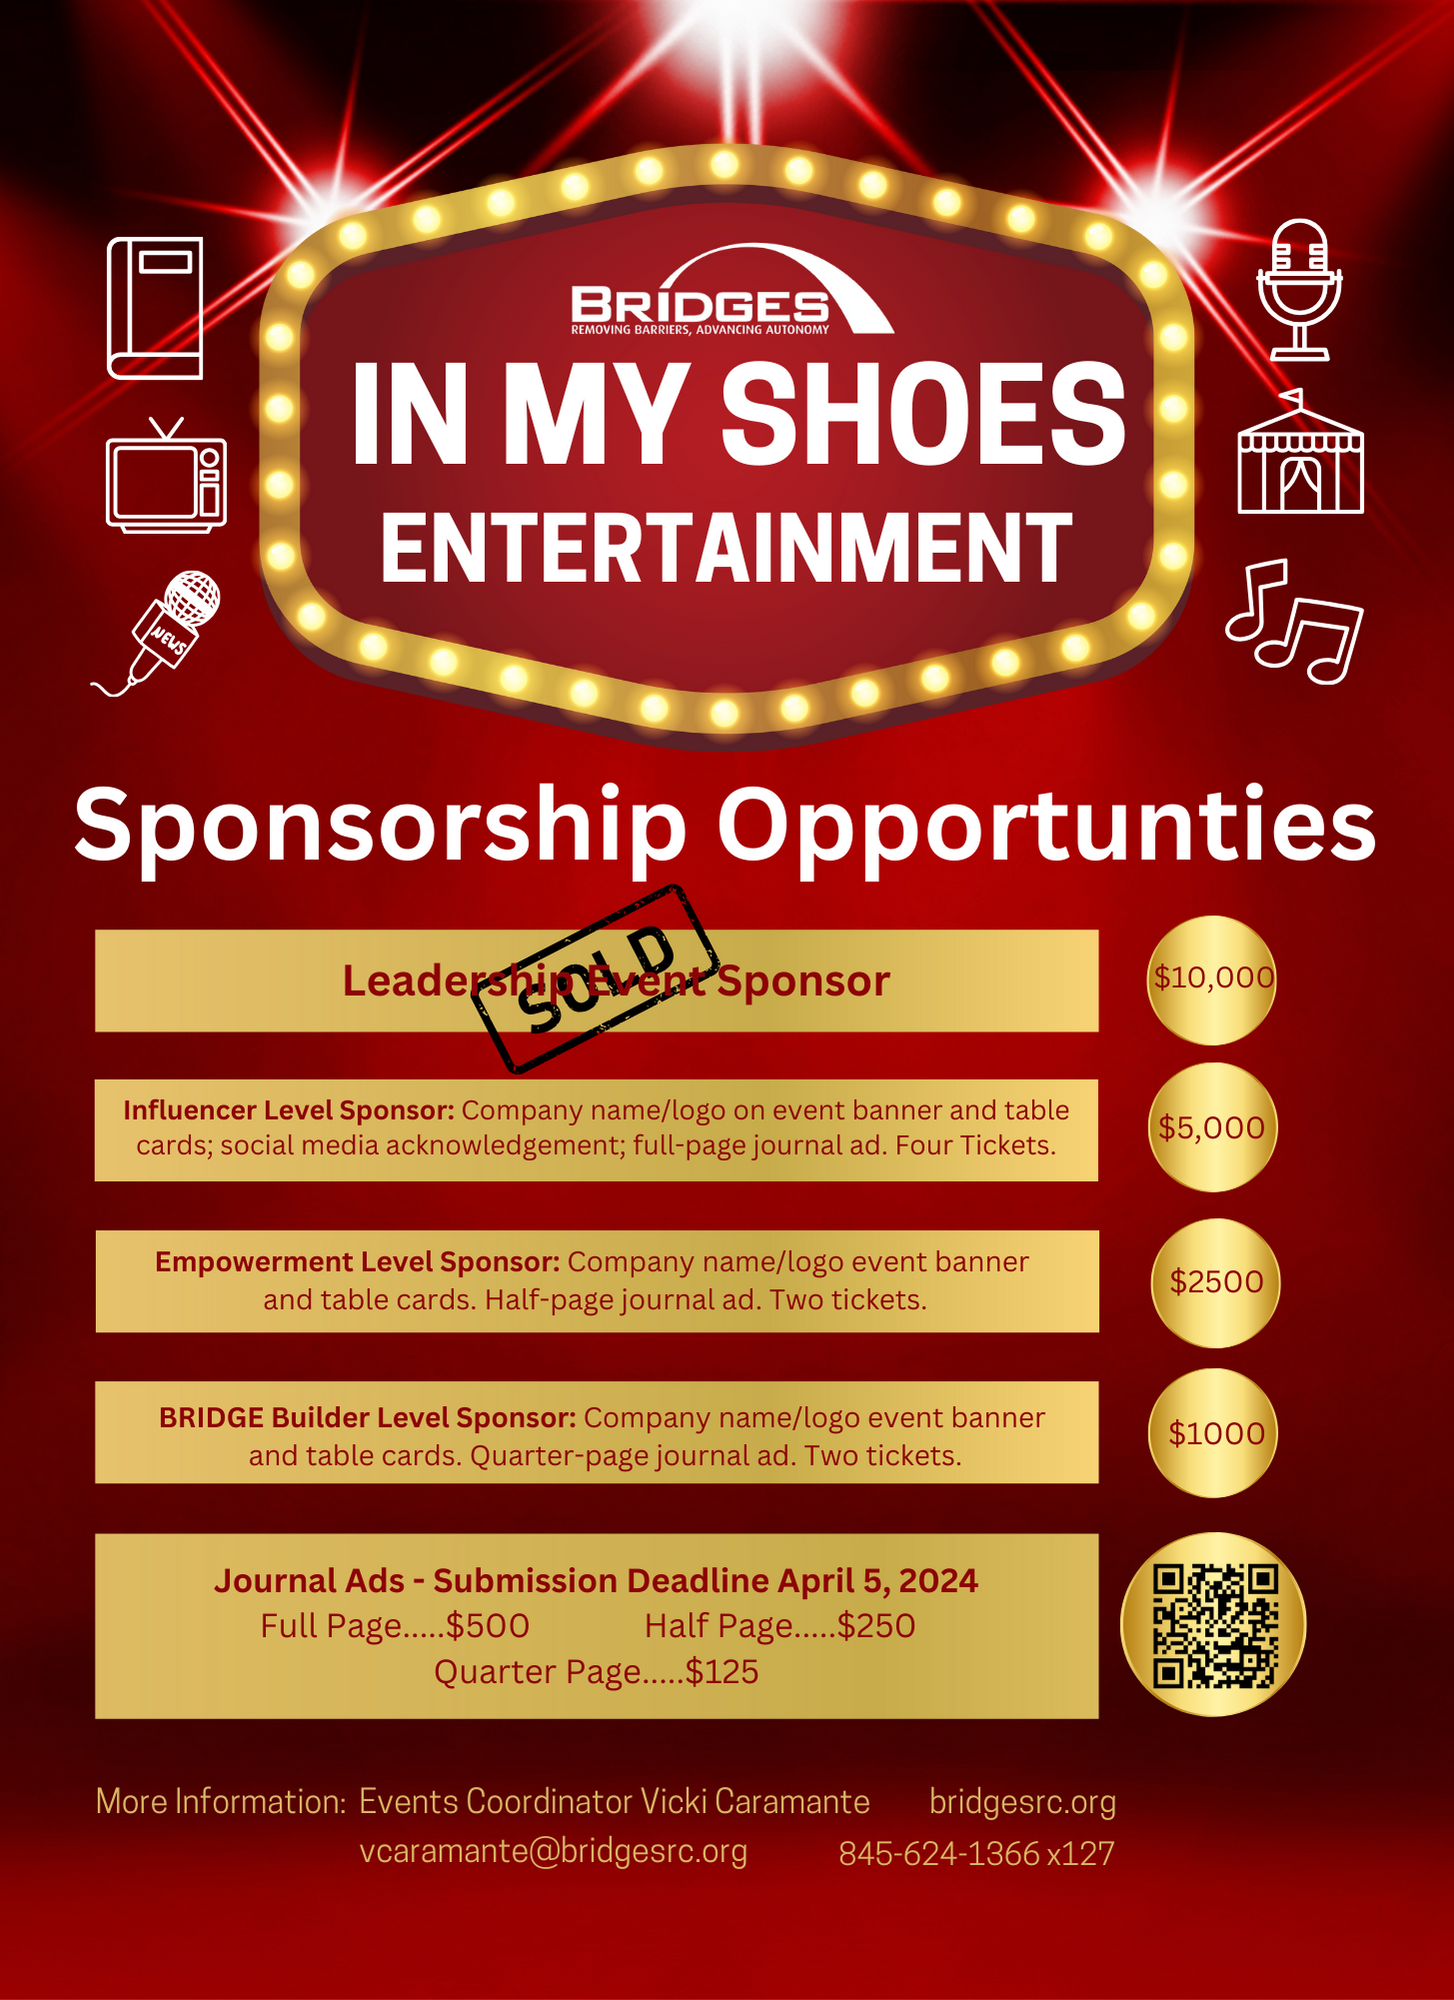 In My Shoes Entertainment Sponsorship Opportunities. Leadership Event Sponsor, Sold! Influencer Level Sponsor: Company name/logo on event banner and table cards; social media acknowledgement; full-page journal ad. Four Tickets. $5000. Empowerment Level Sponsor: Company name/logo event banner and table cards. Half-page journal ad. Two tickets. $2,500. Bridge Builder Level Sponsor: Company name/logo event banner and table cards. Quarter-page journal ad. Two tickets. $1000. Journal Ads, submission deadline April 5, 2024. Full page $500, Half page $250, Quarter page $125. More information, contact Events Coordinator, Vicki Caramante, VCaramante@BridgesRC.org, 845-825-3301. BridgesRC.org